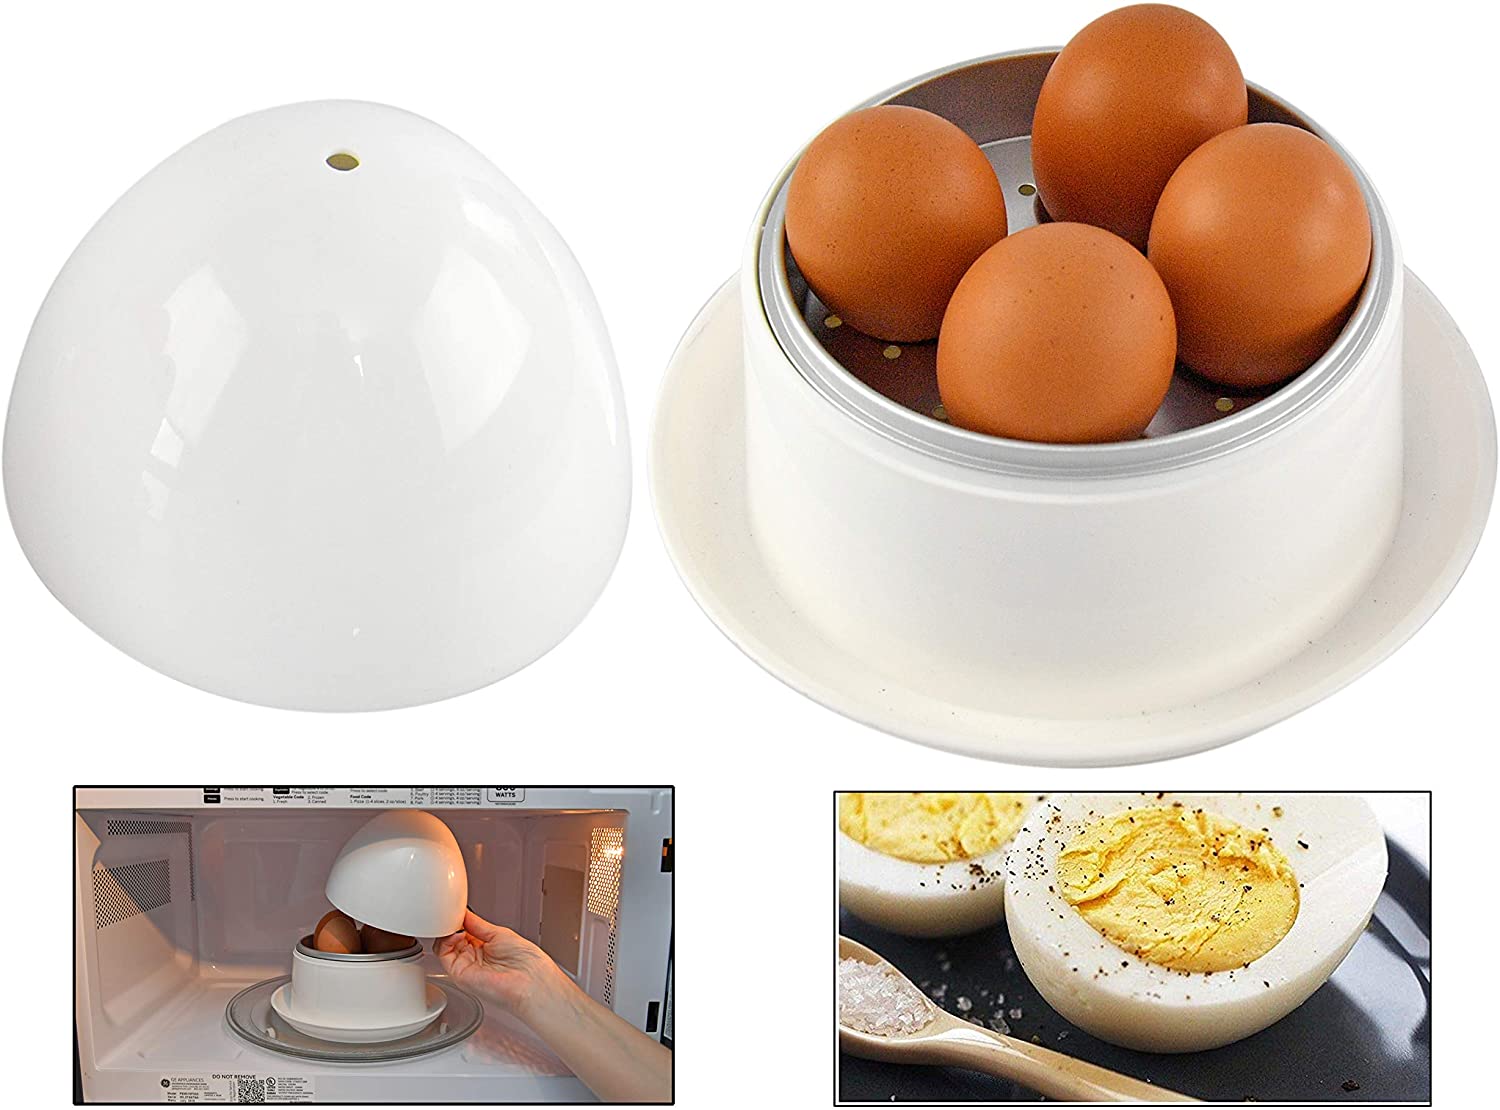 Home-X Microwave Egg Boiler with Saucer for Hard Boiled or Soft Boiled Eggs, Egg Boiler without Ear Hole Required, Dishwasher Safe up to 4 Eggs